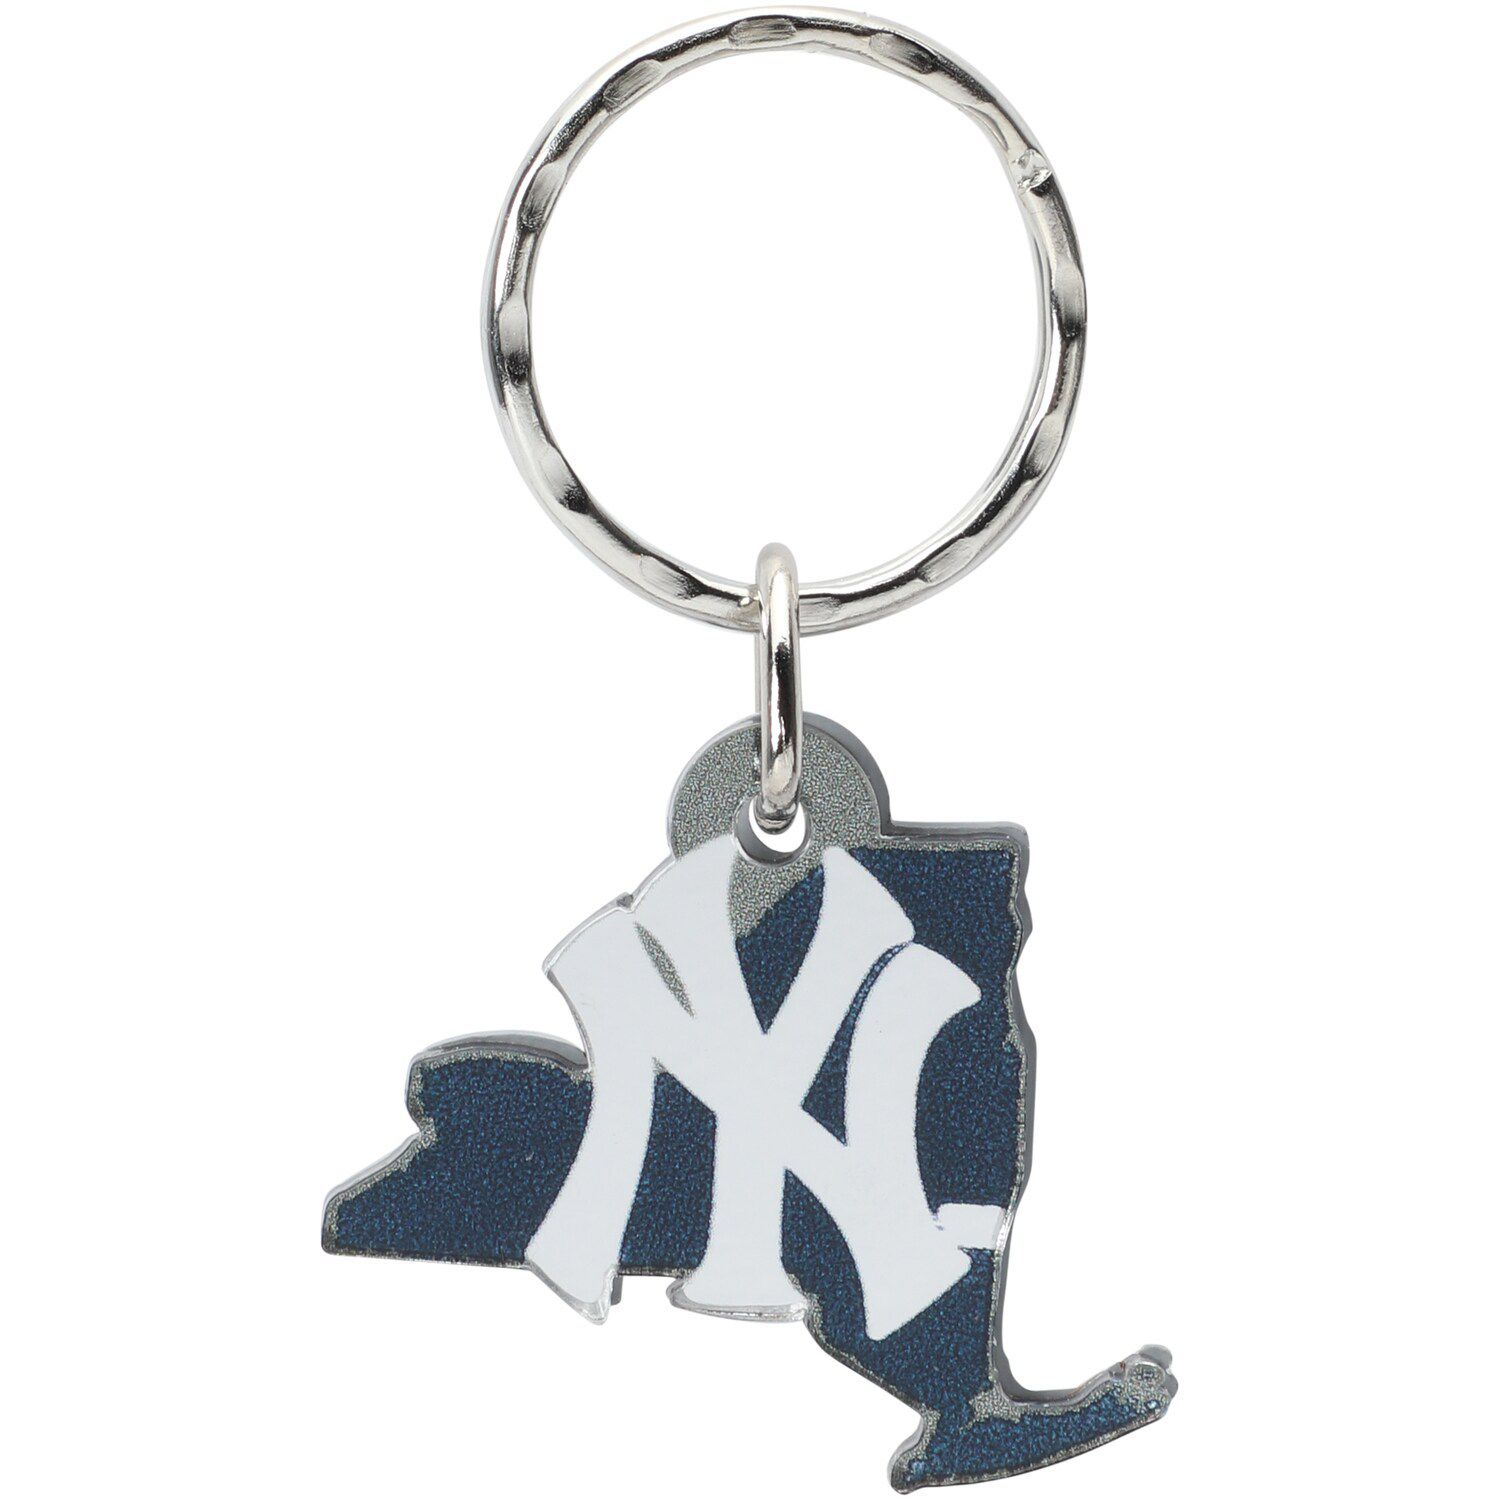 Royce New York Leather Valet Key Chain - Silver